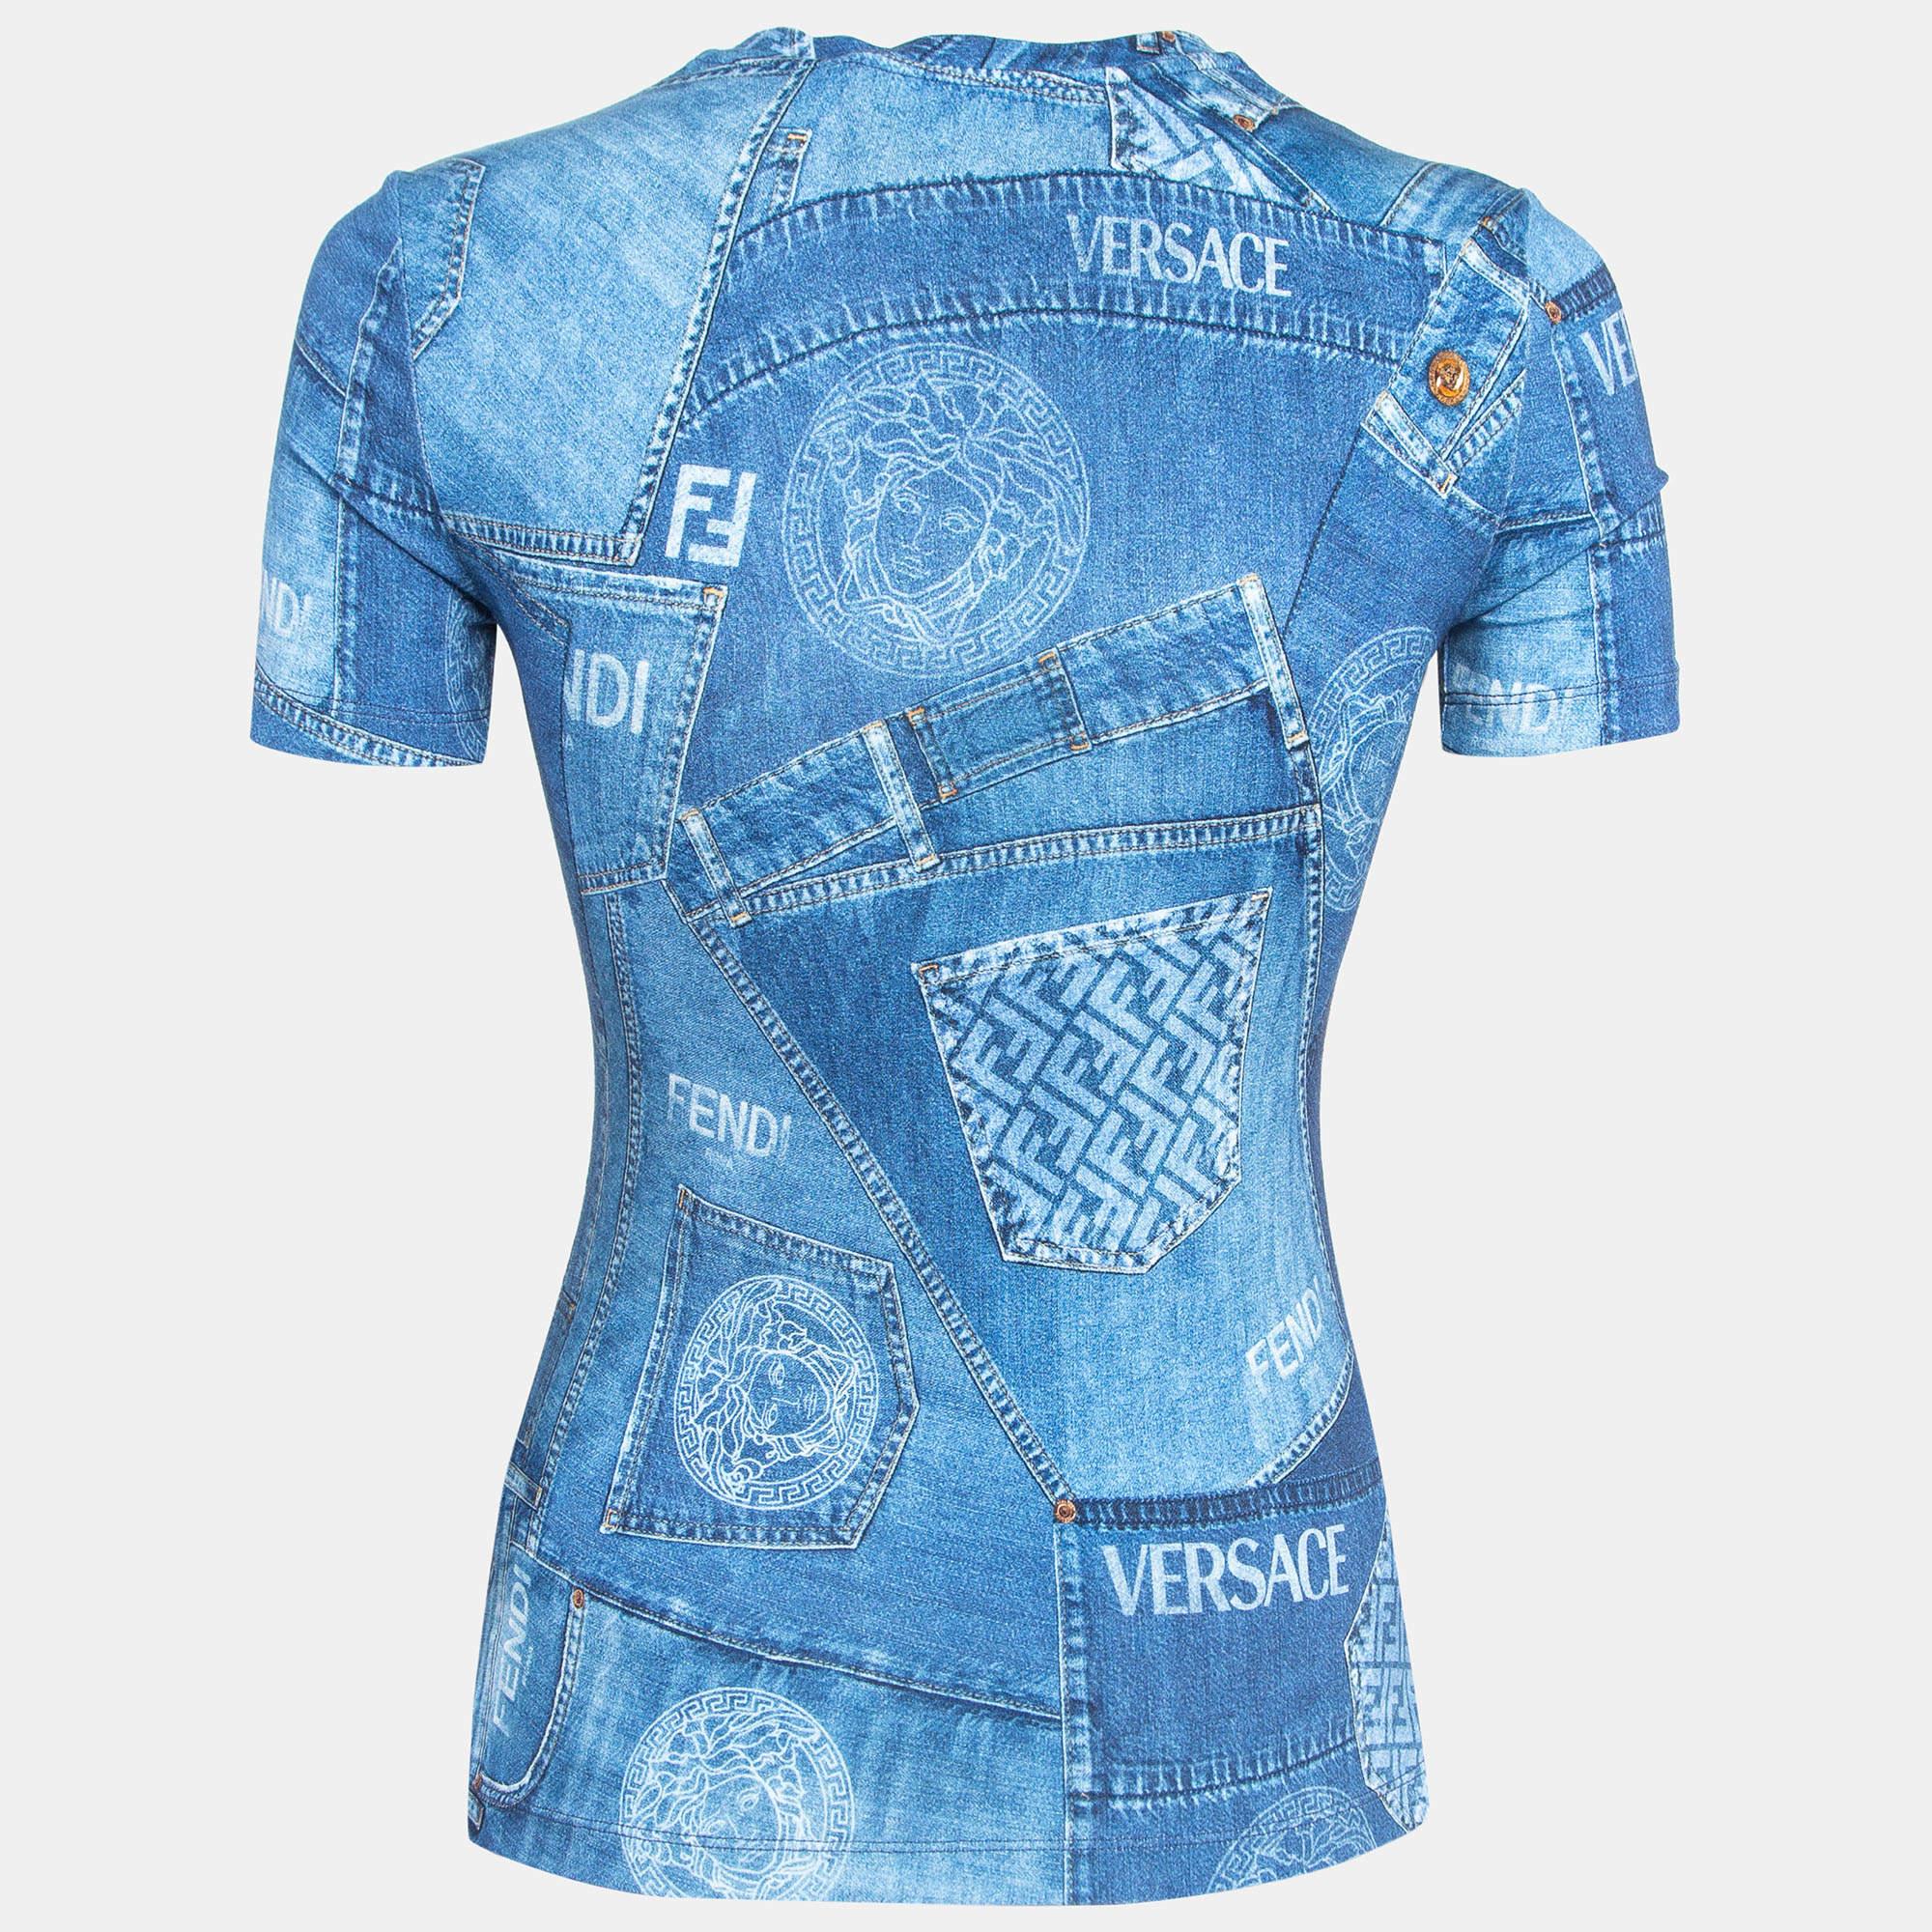 Immerse yourself in luxury with the Fendi x Versace t-shirt. Crafted with exquisite attention to detail, this opulent garment features a denim print pattern accented by sparkling crystal embellishments, effortlessly blending style and extravagance